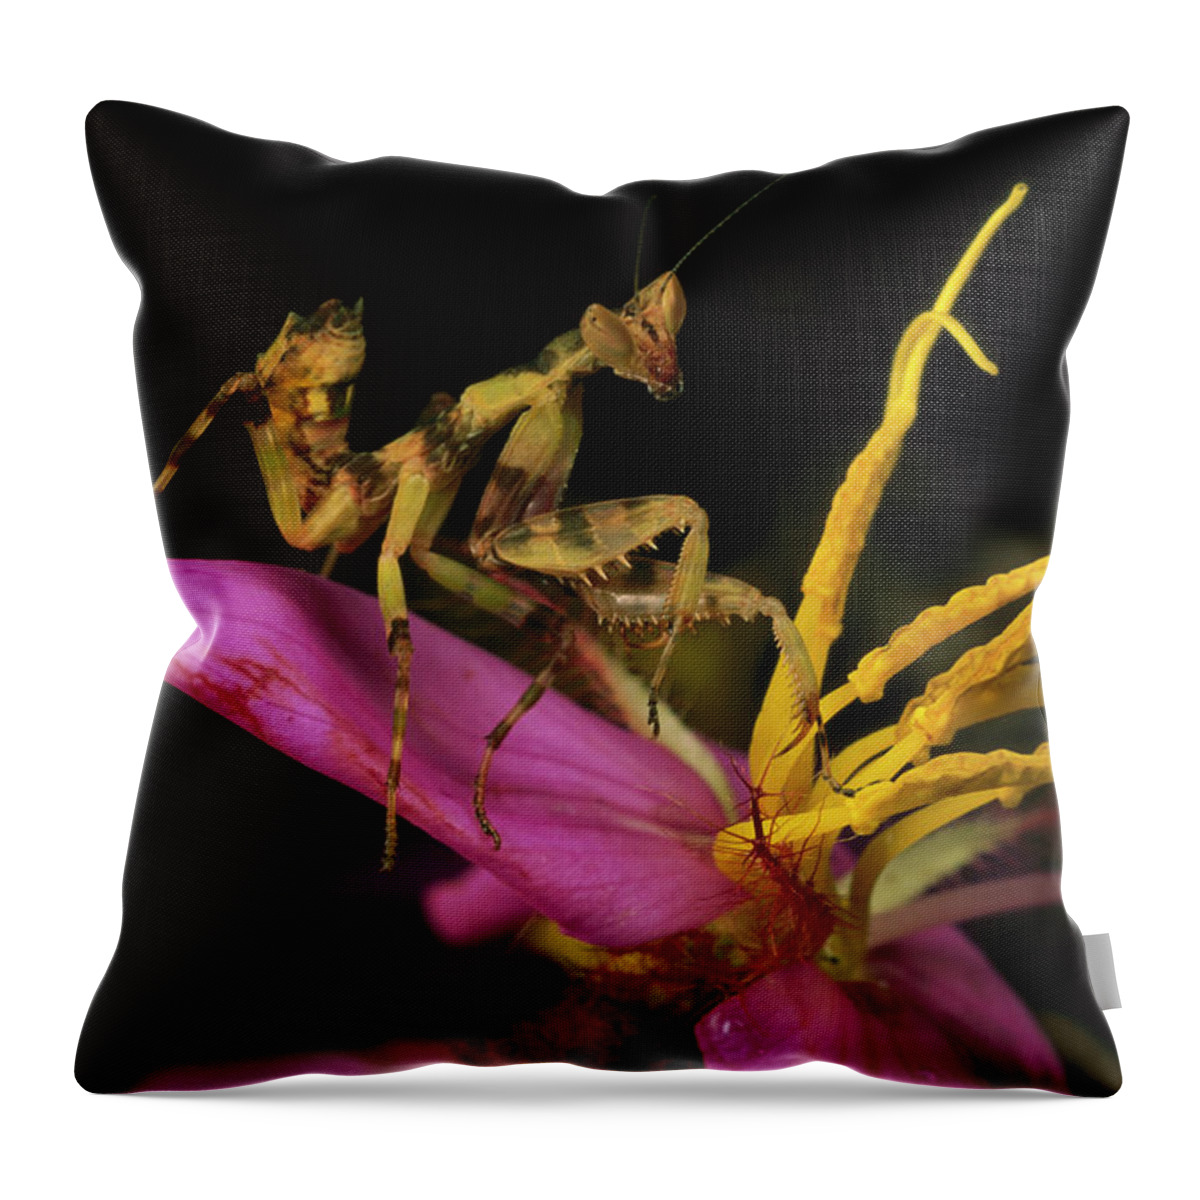 00750980 Throw Pillow featuring the photograph Flower Mantis Nymph by Mark Moffett